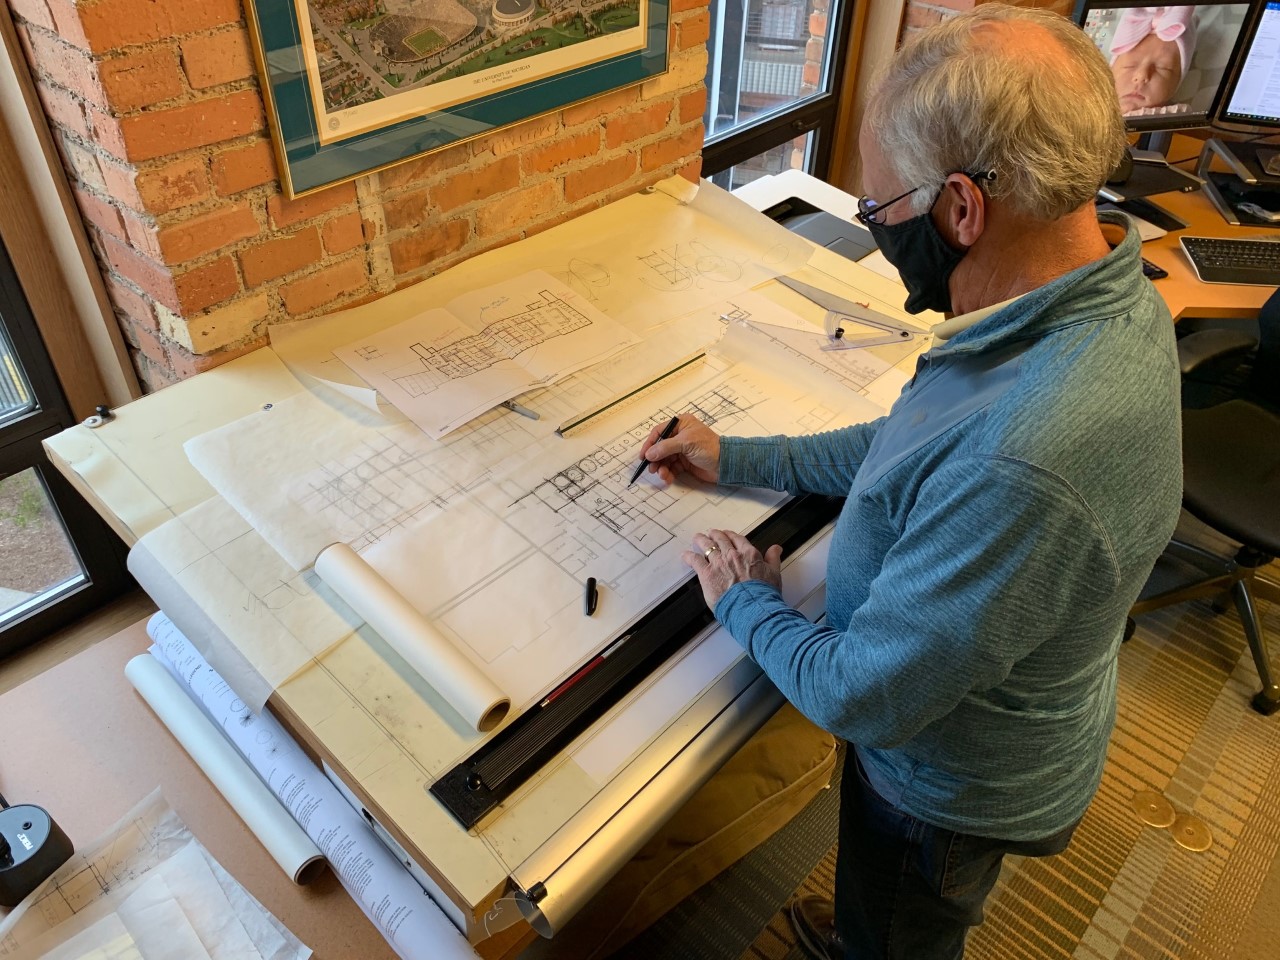 Image shows a man sketching plans on large architectural paper.